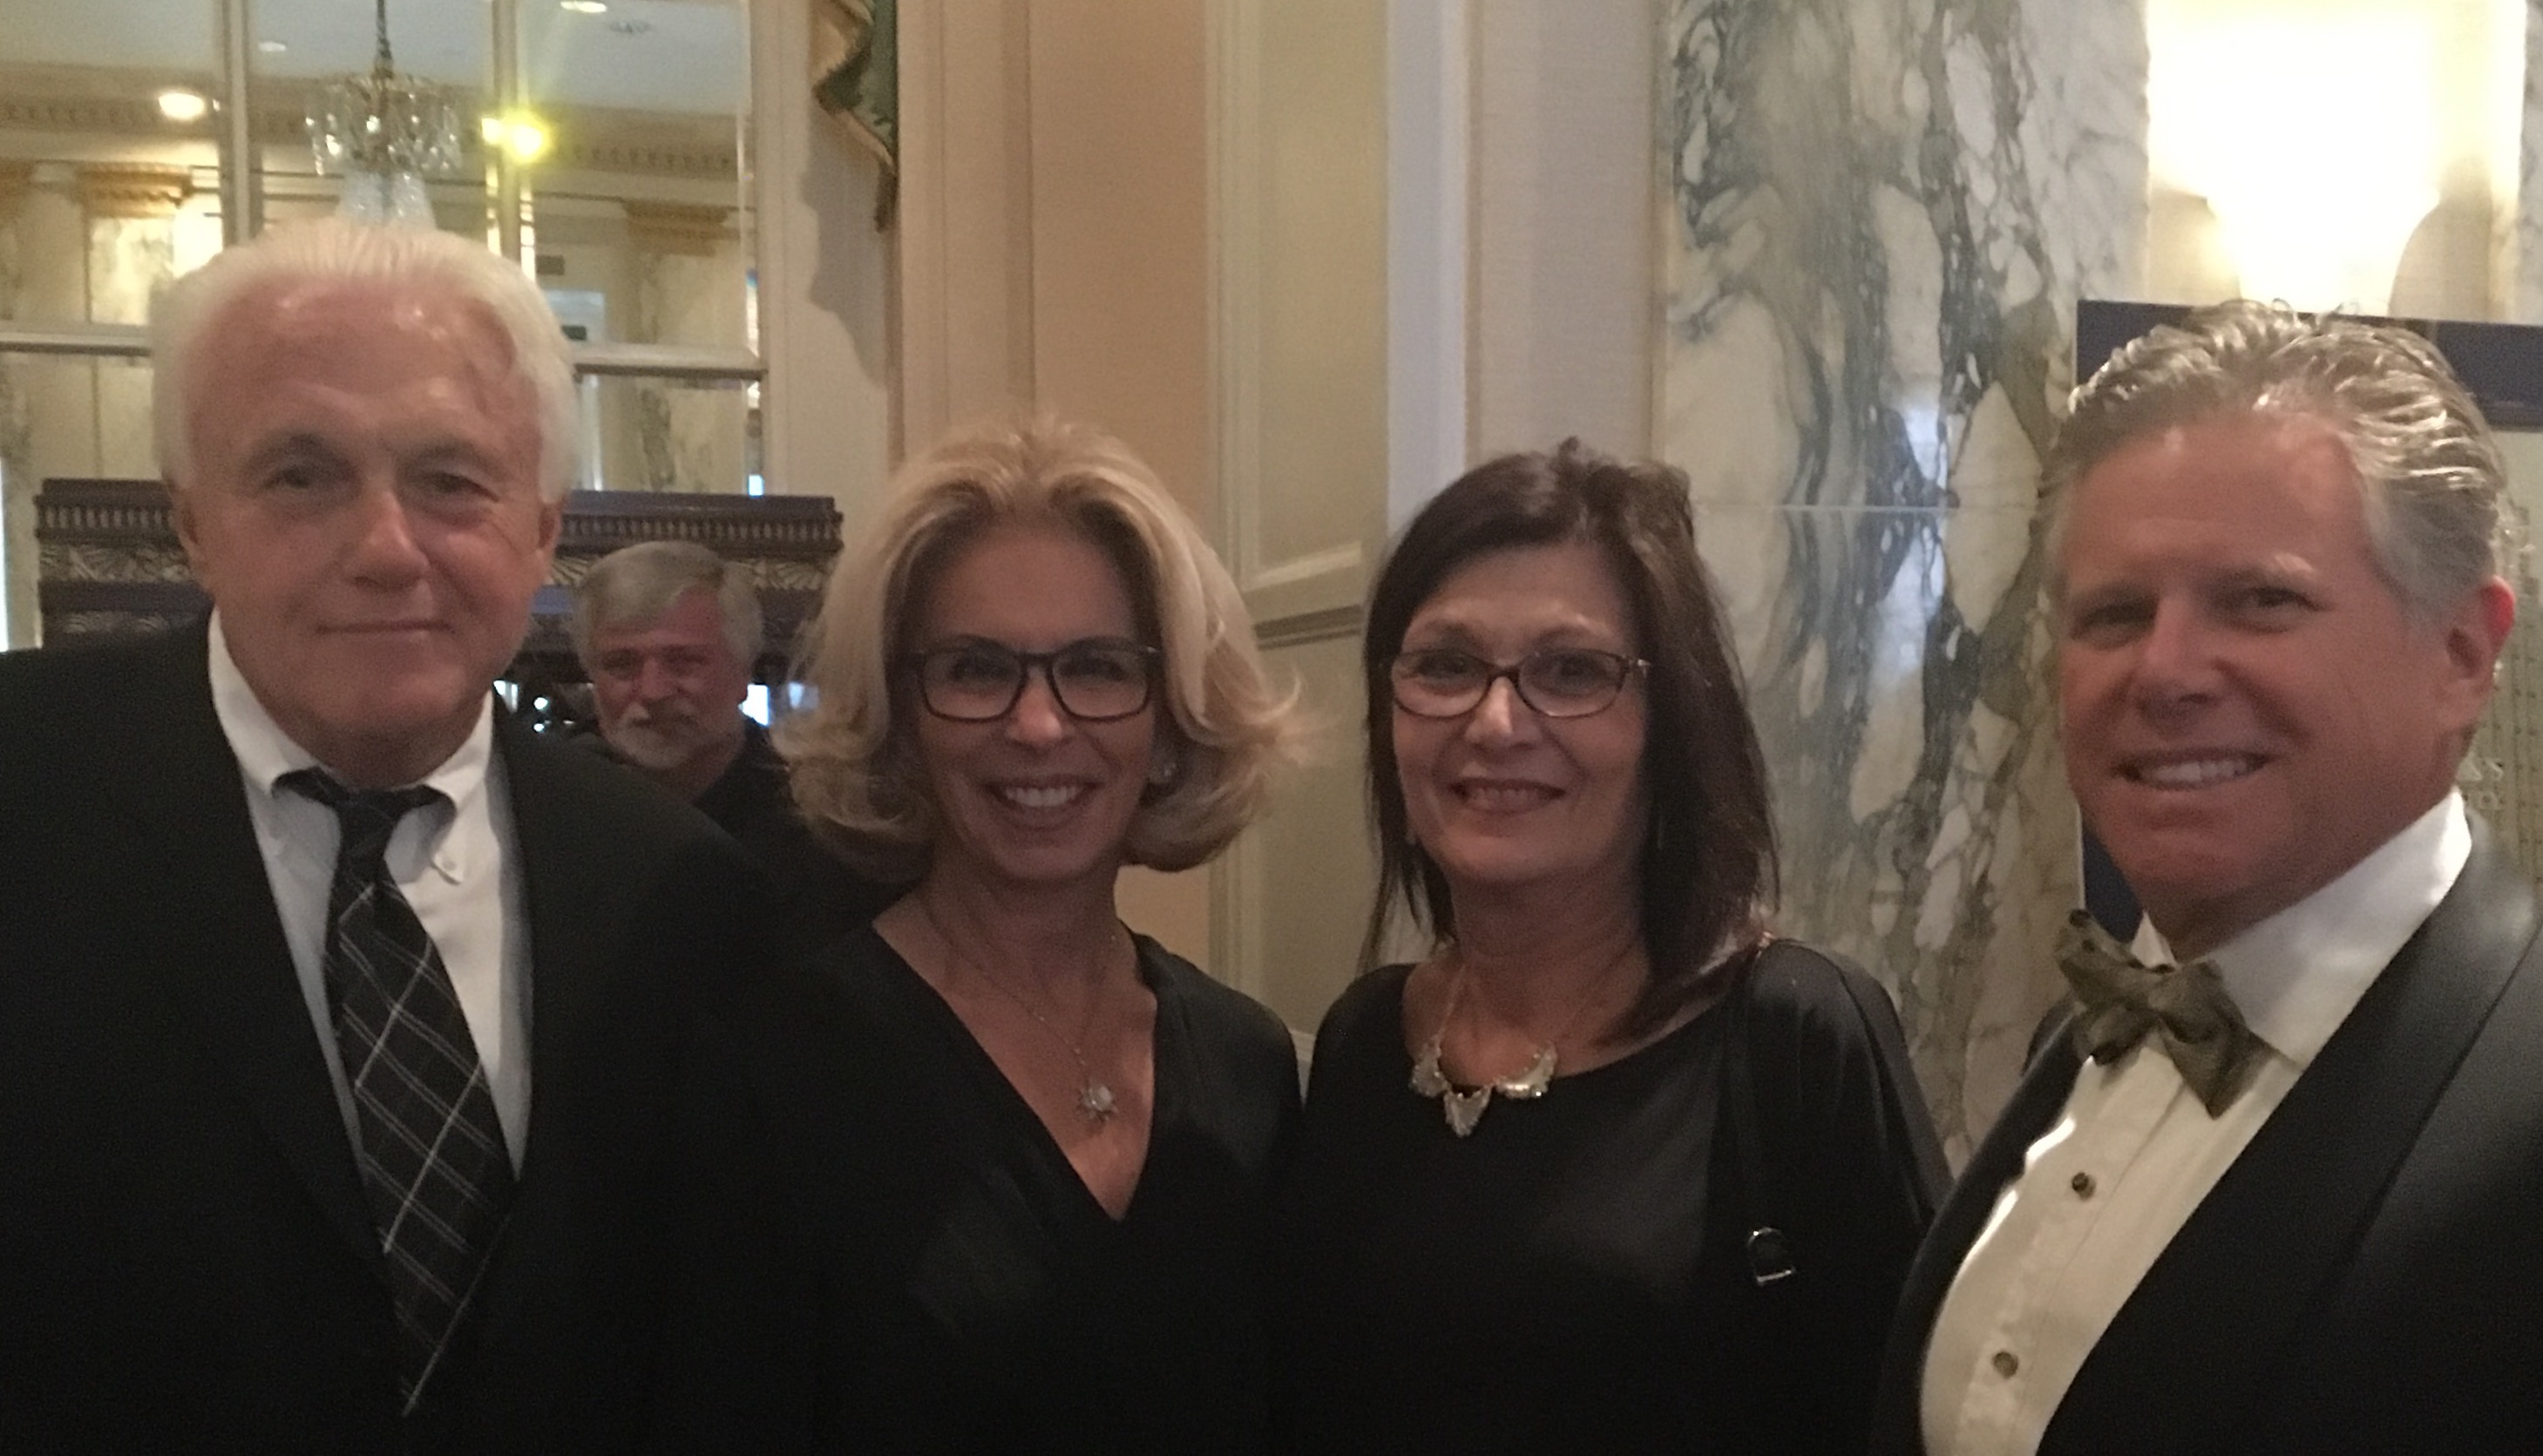 Bud London meets with New York State’s Chief Judge Janet DiFiore and the Honorable Helene Sacco and the Honorable George Sacco at the St. John’s 90th Anniversary Gala.